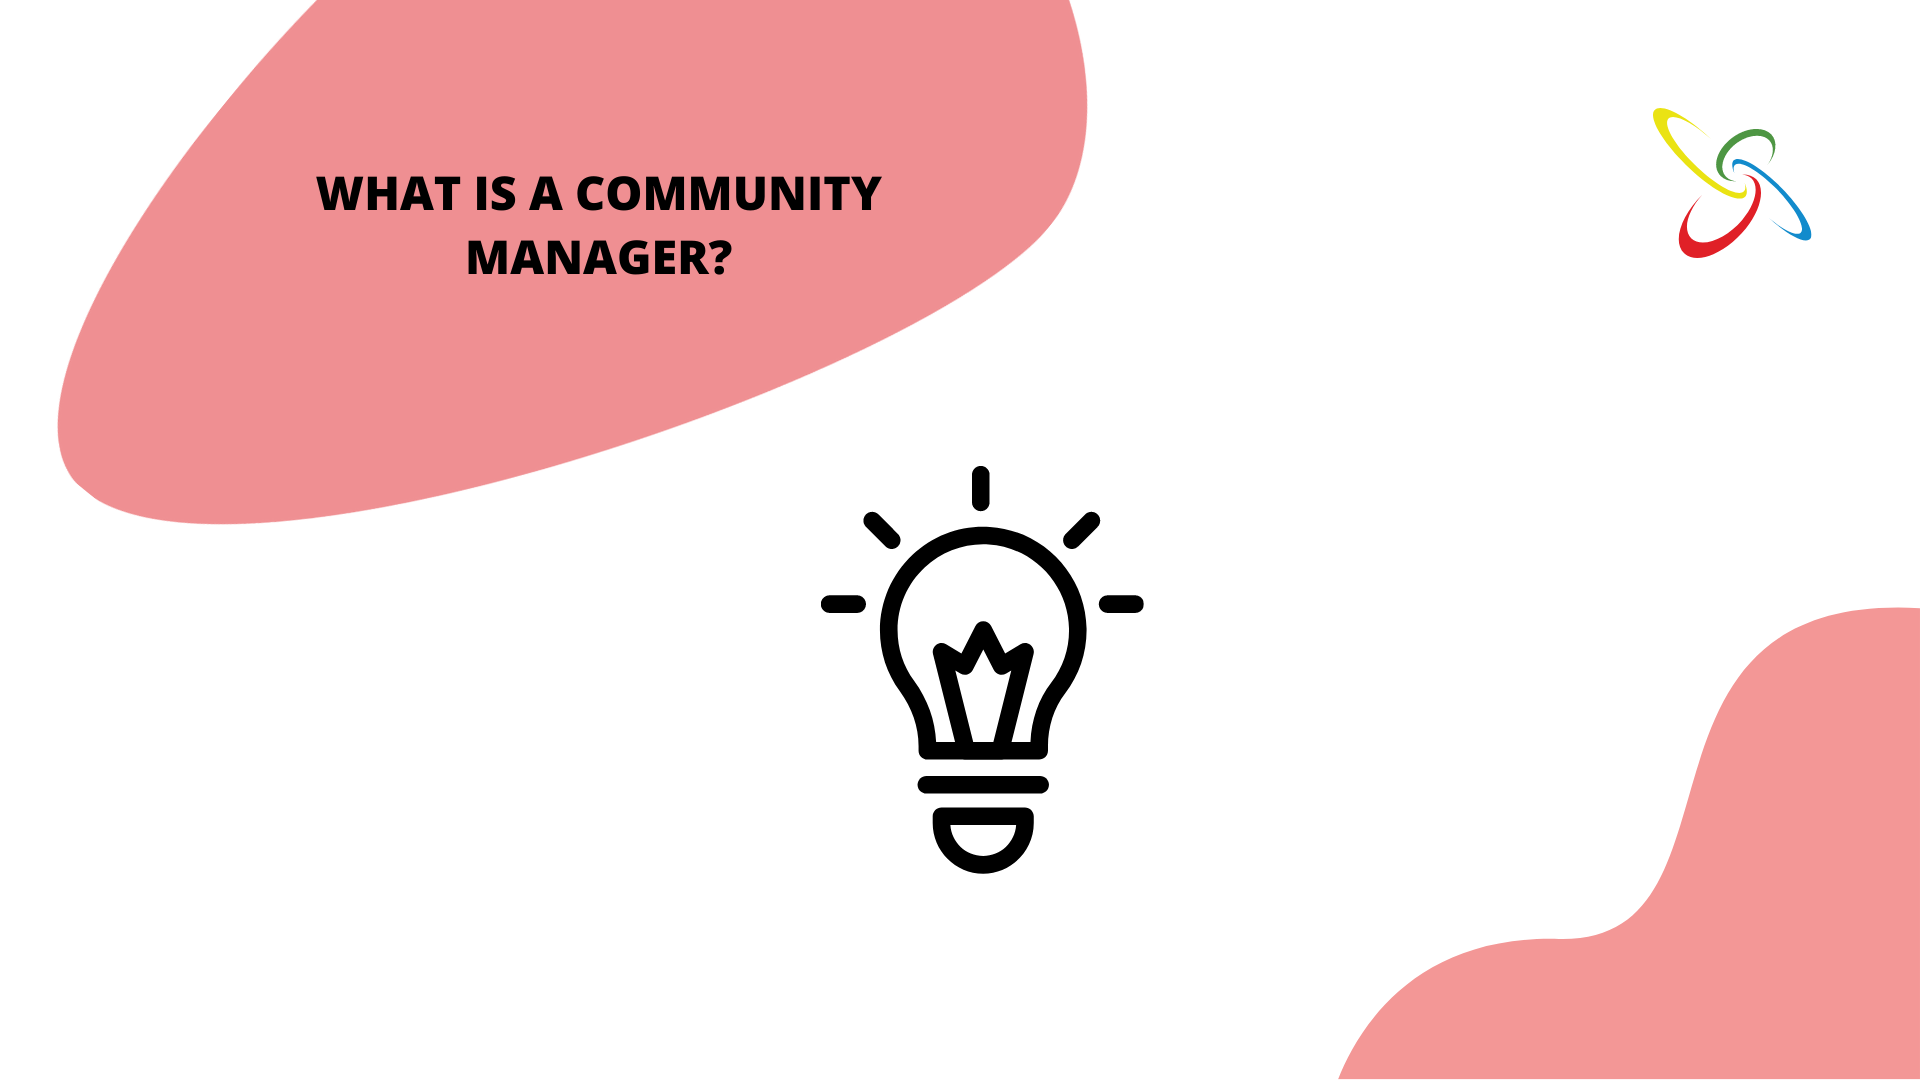 What is a community manager?